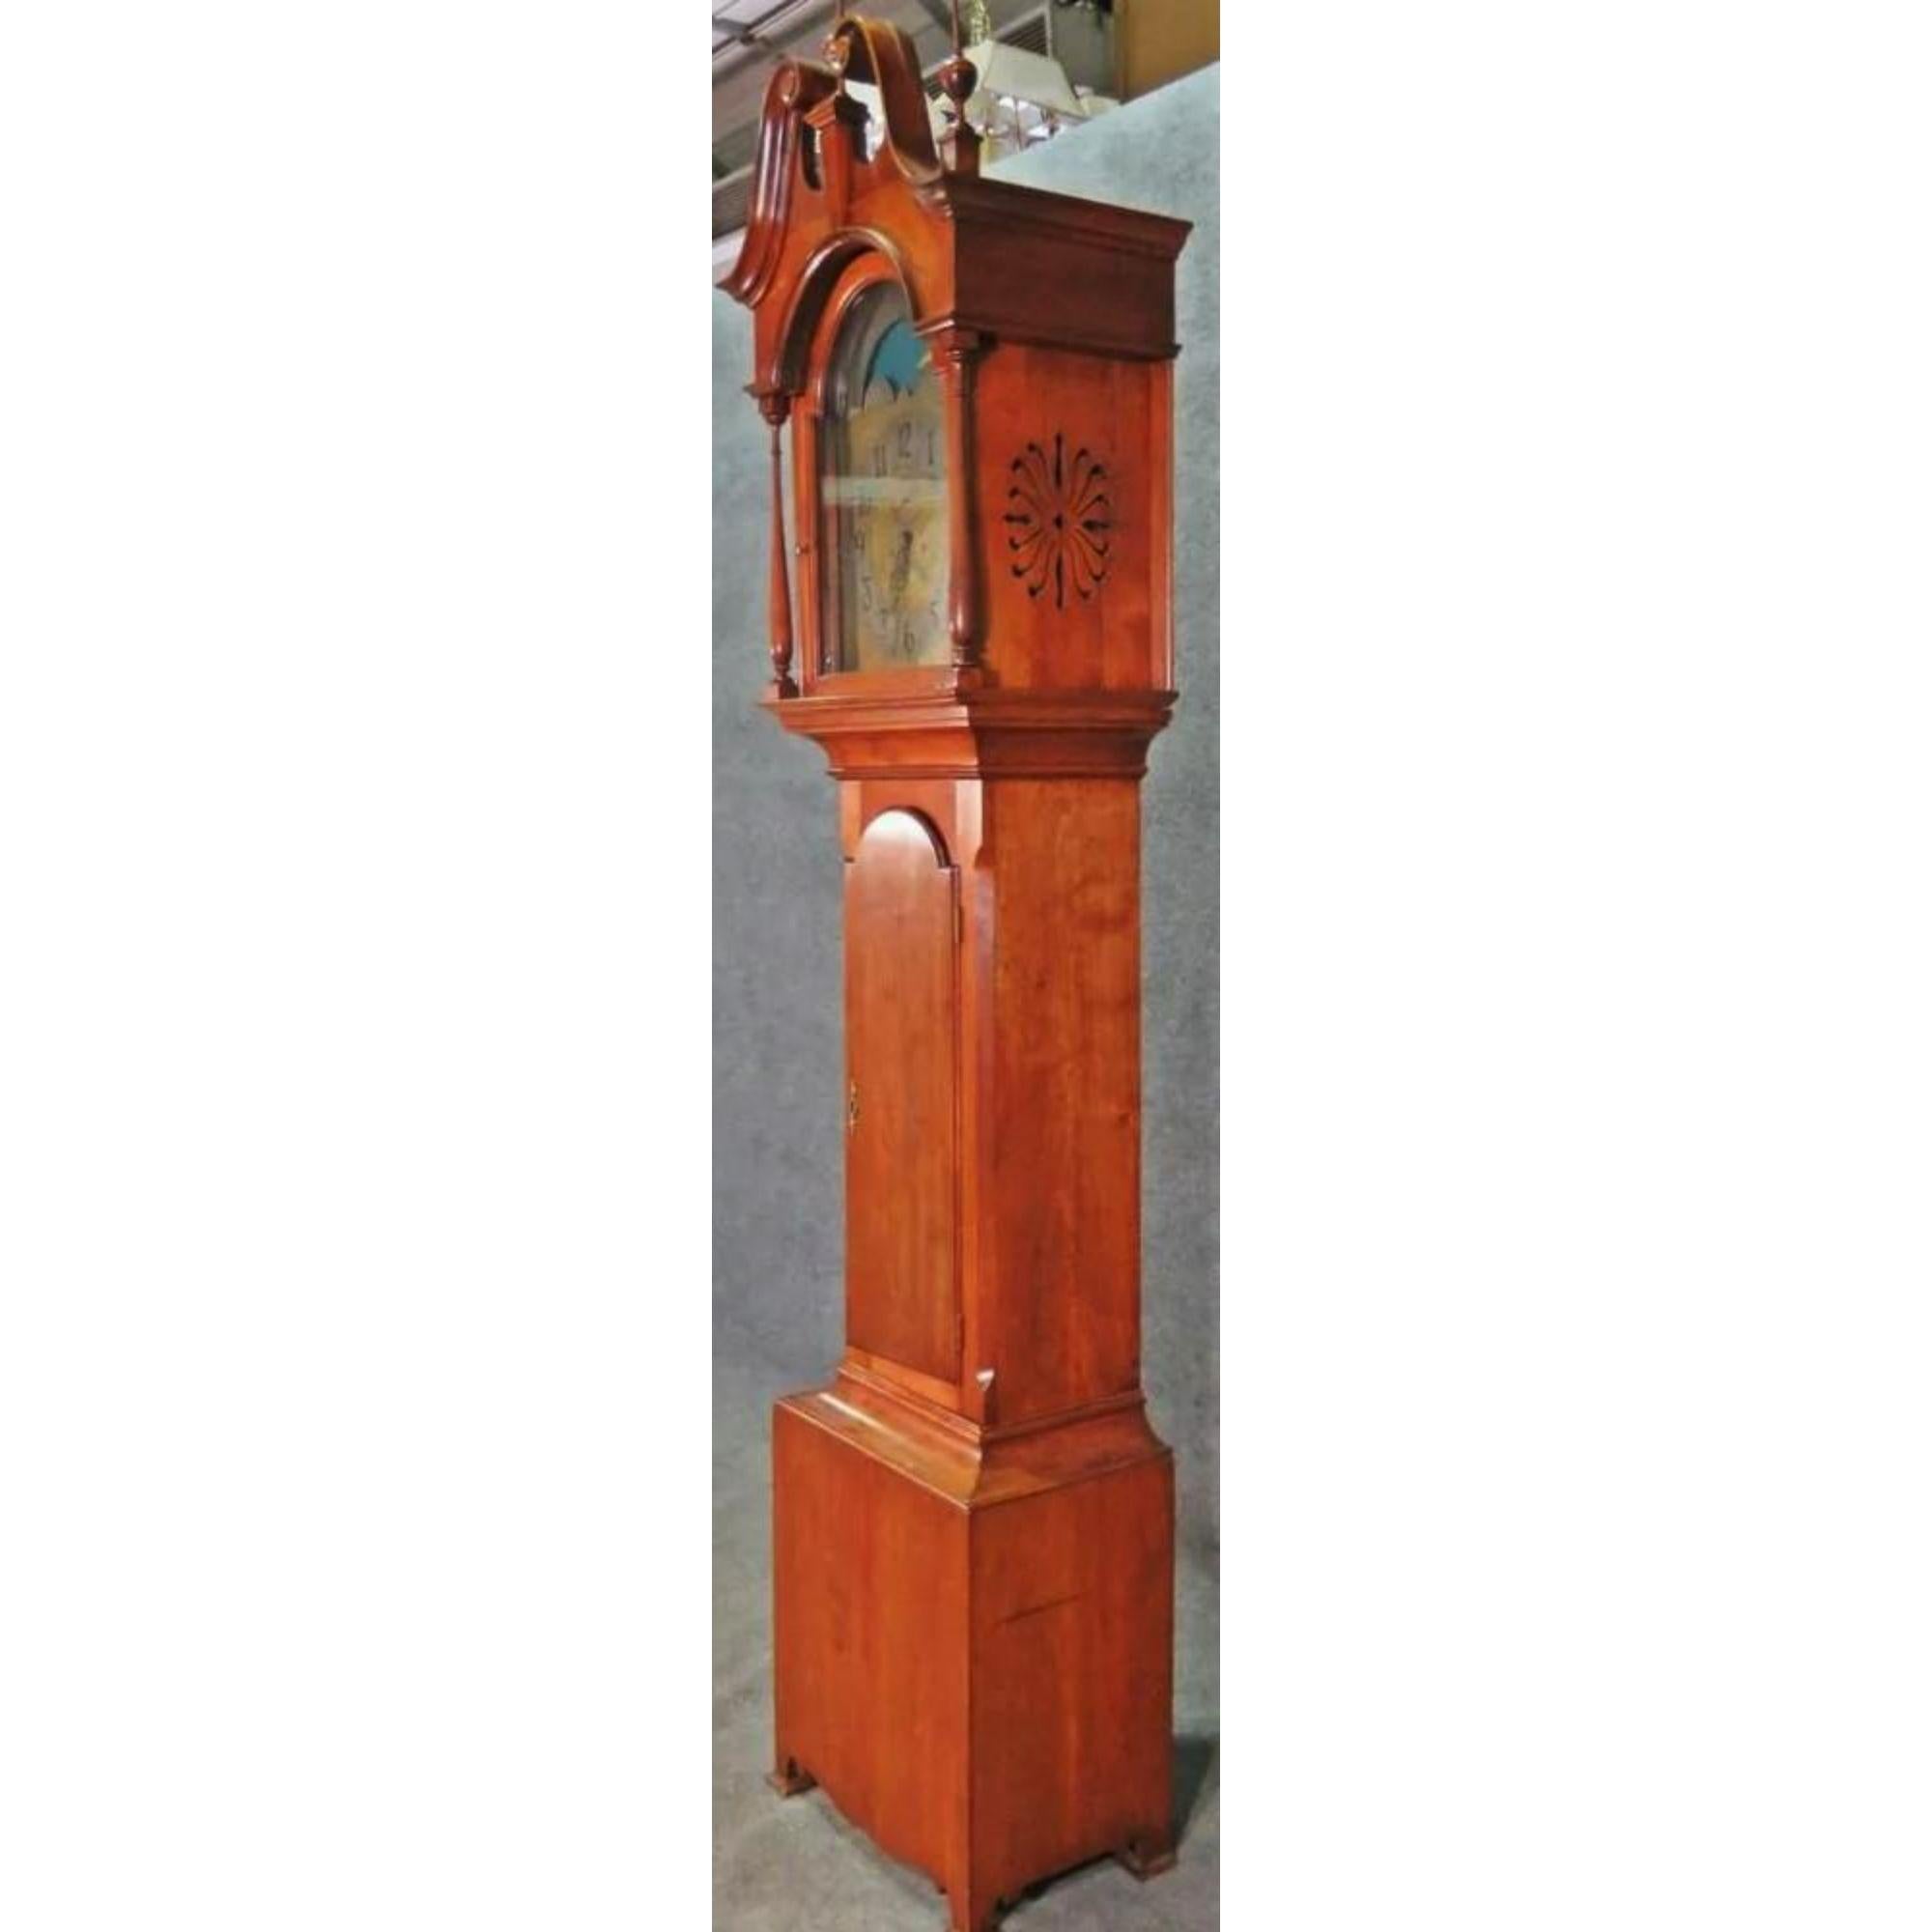 Antique Mahogany grandfather longcase clock

Additional information: 
Materials: Mahogany
Color: Brown
Period: 19th century
Styles: Federal
Item type: Vintage, antique or pre-owned
Dimensions: 22